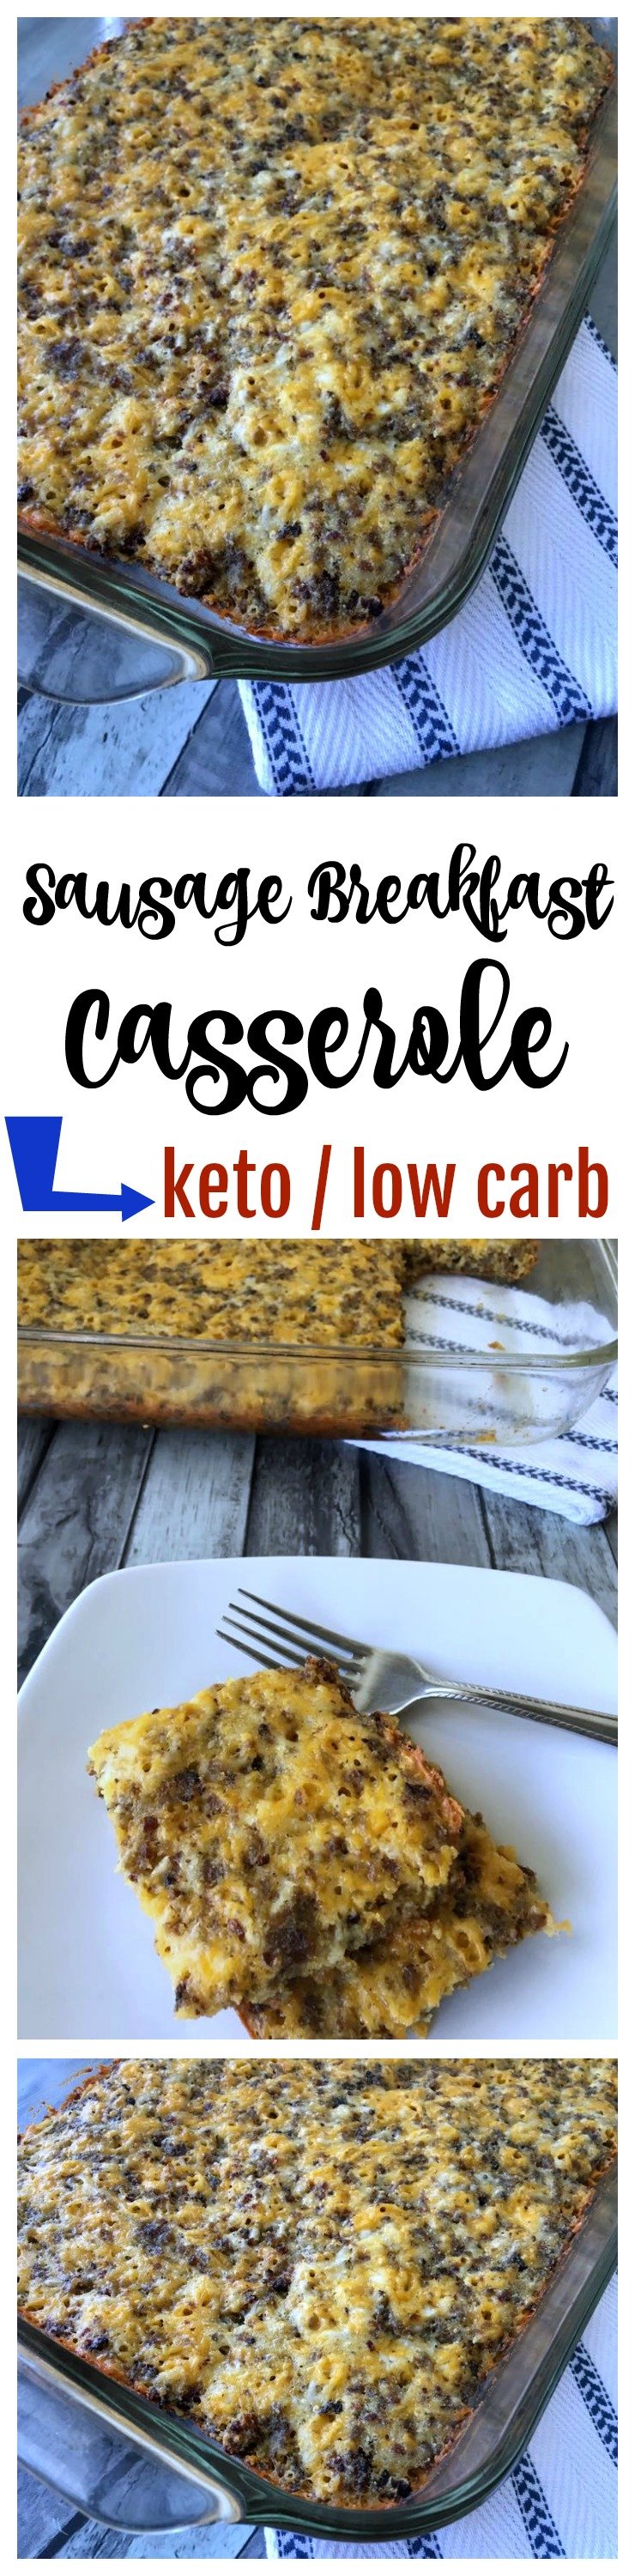 Make this delicious Keto Breakfast Casserole with sausage as a perfect prep ahead meal! Easy breakfast recipes like this are ideal for low carb diets and the ketogenic diet lifestyle! Add this to your keto menu plan today!